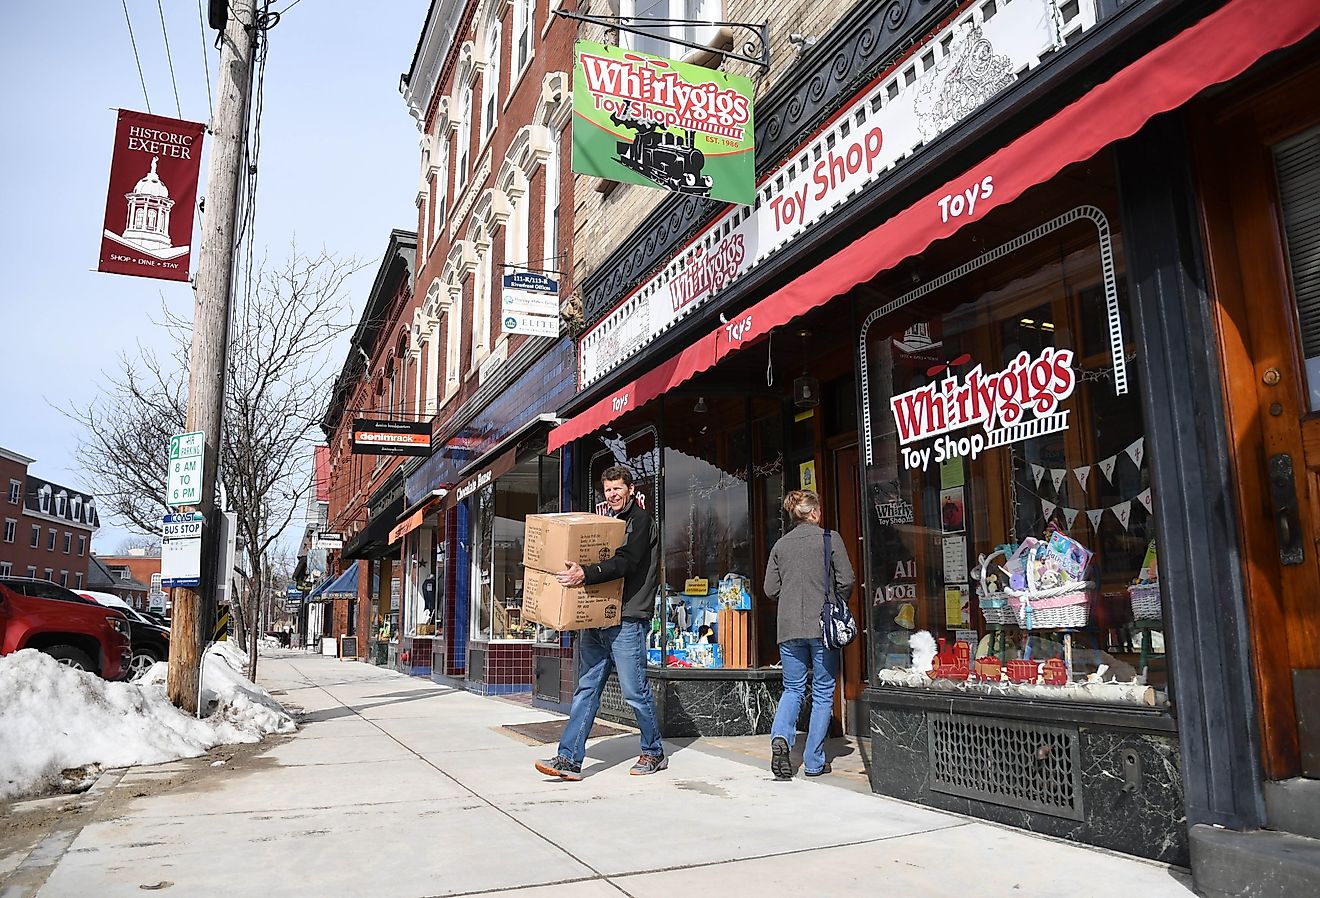 An independent toy store in downtown Exeter, New Hampshire. Image credit Andrew Cline via Shutterstock